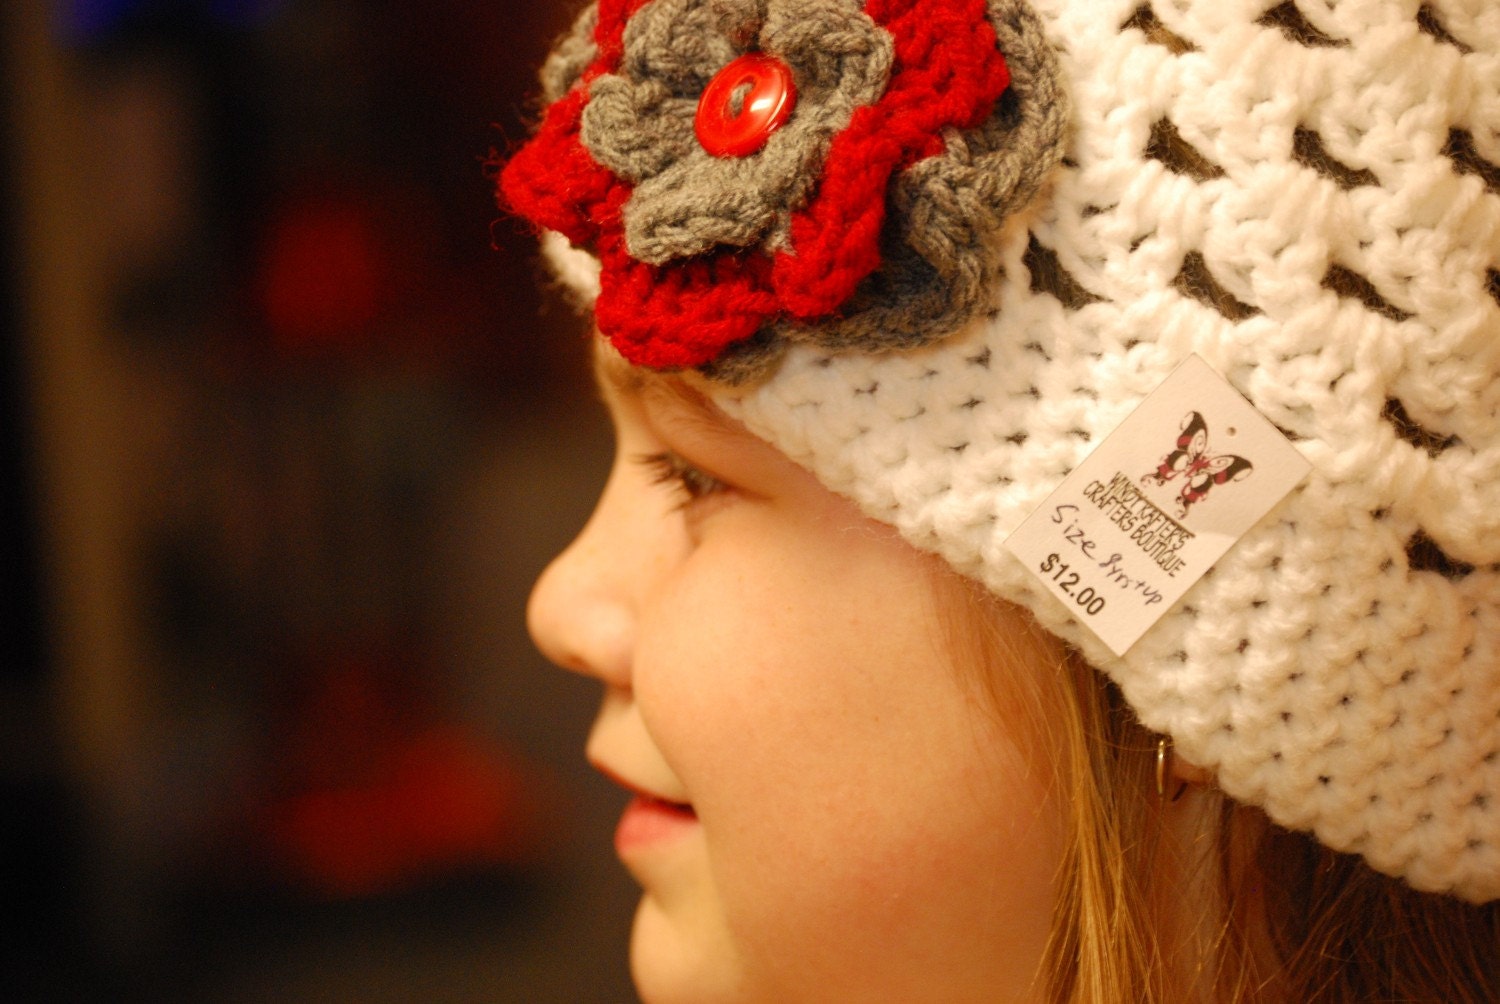 Boutique Crochet Flower beanie, order yours today- custom colors and sizes